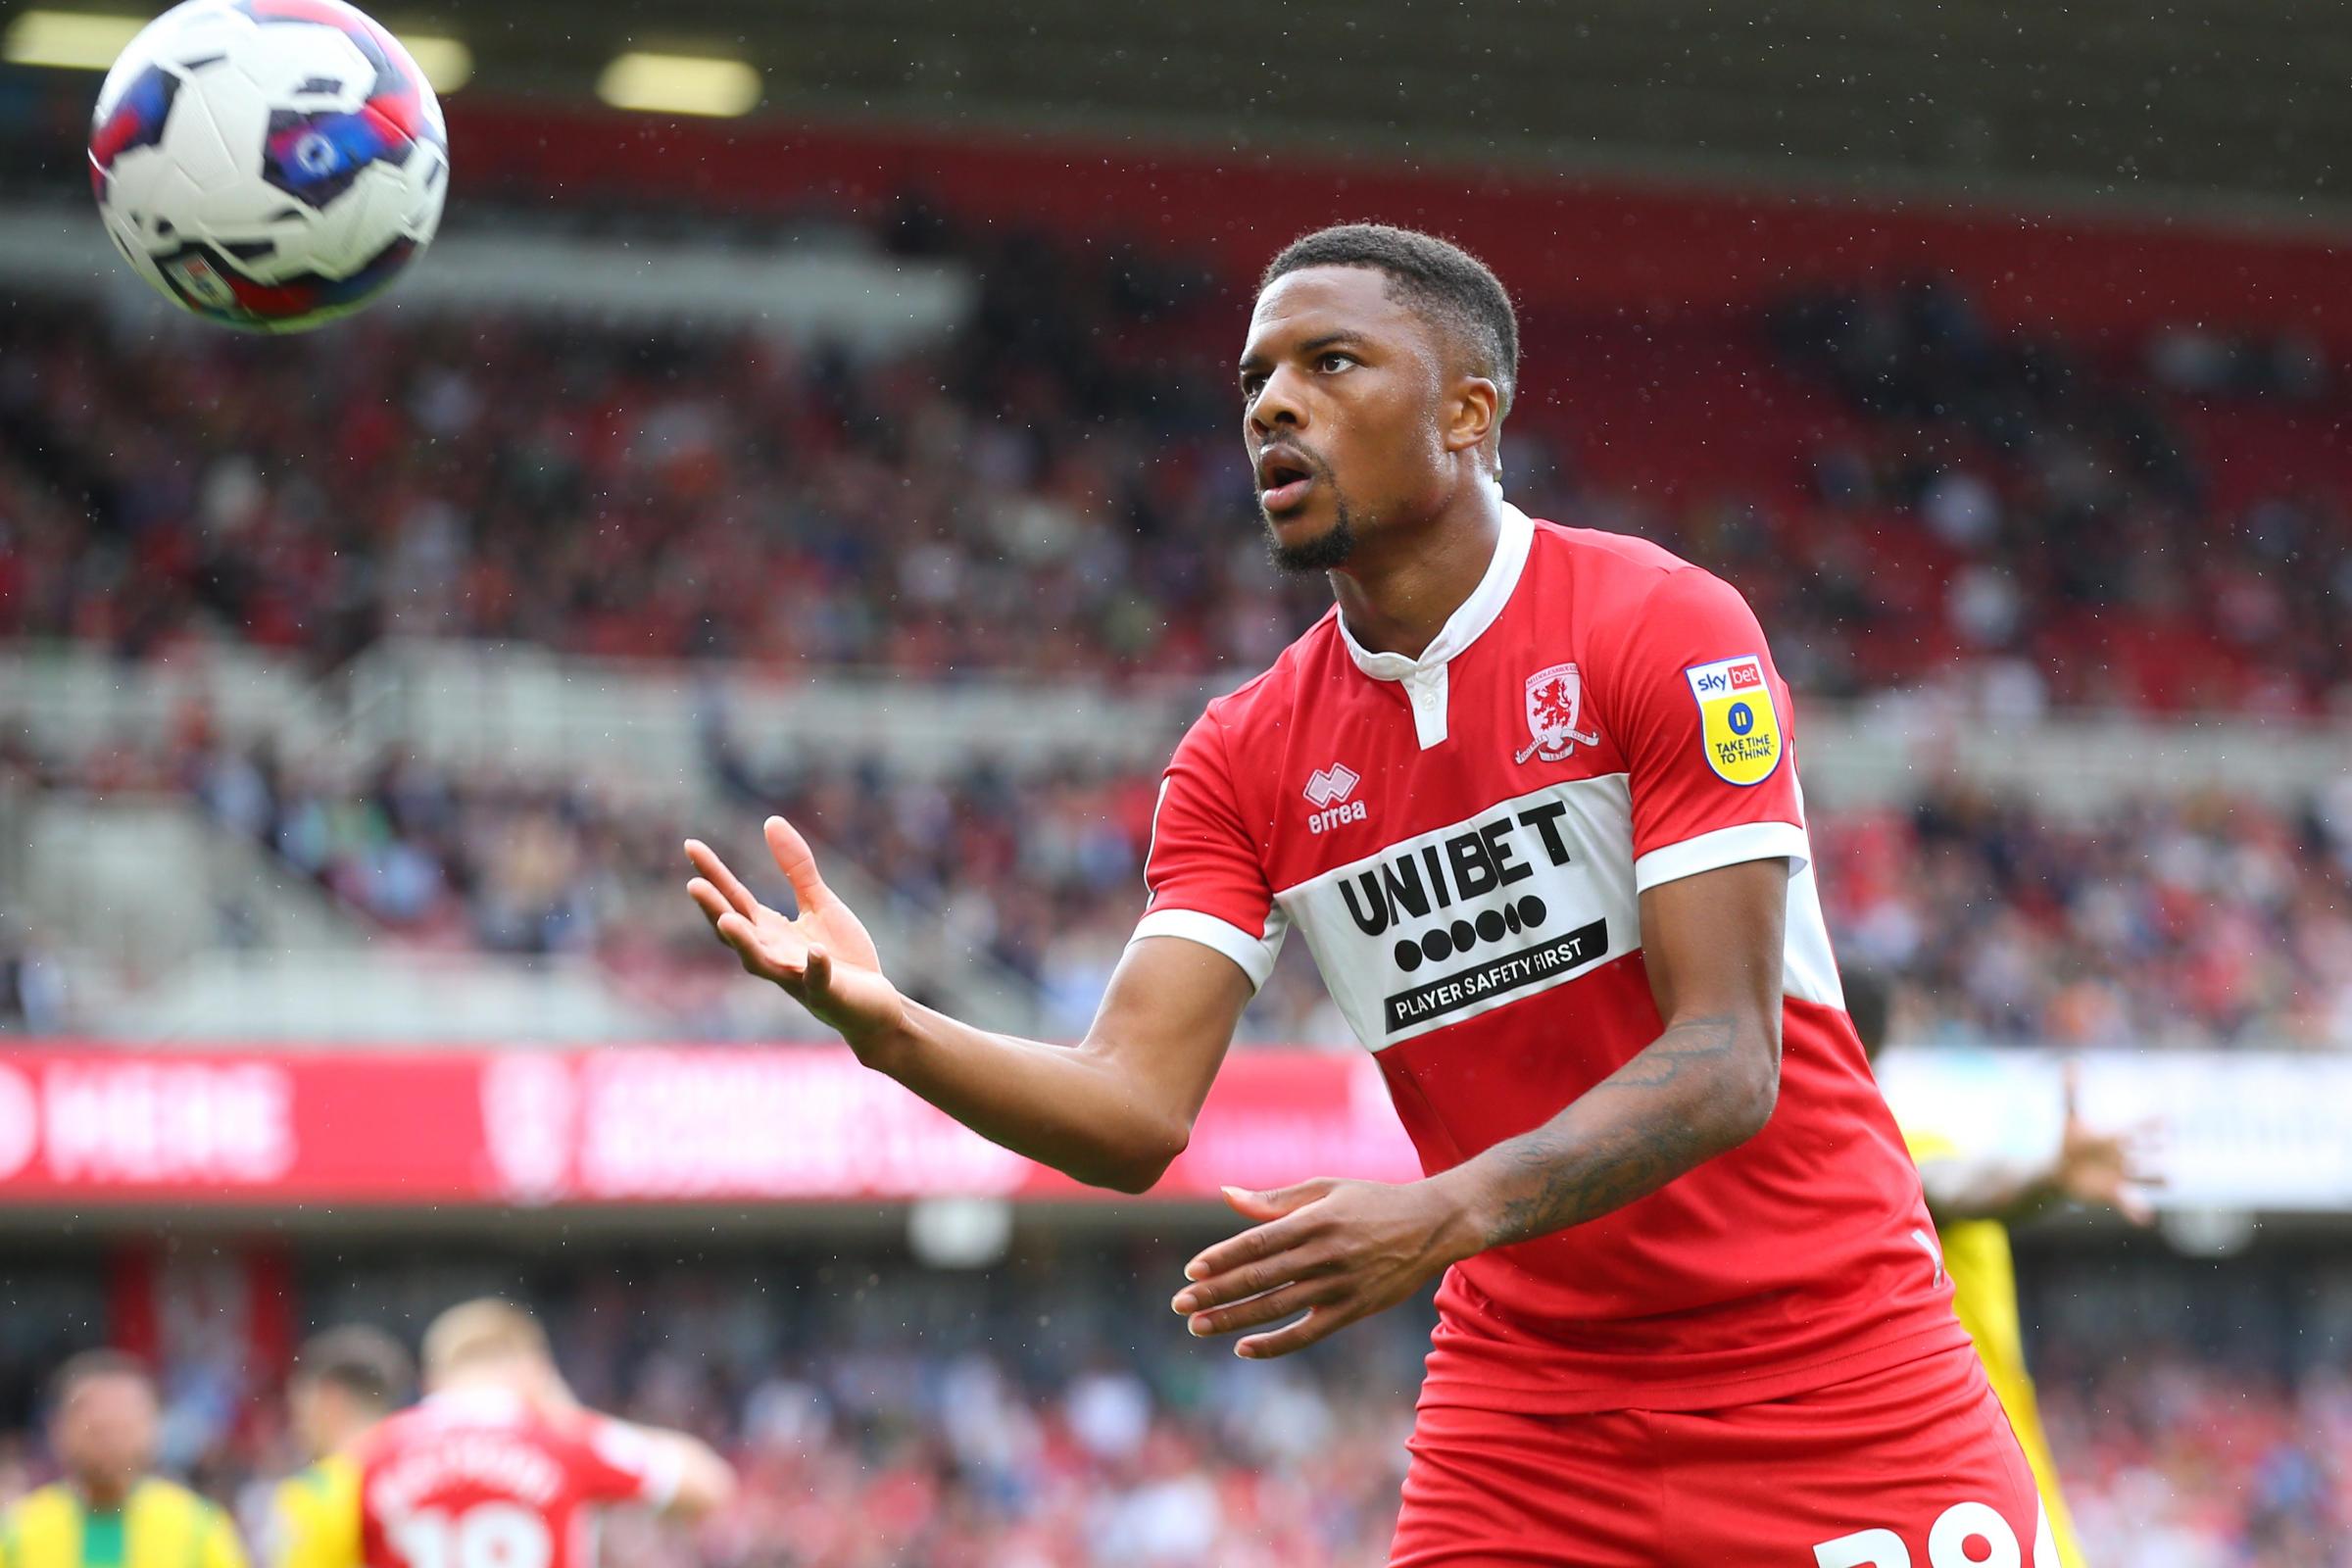 Boro: Chuba Akpom staking his claim and Duncan Watmore's fitness issues revealed